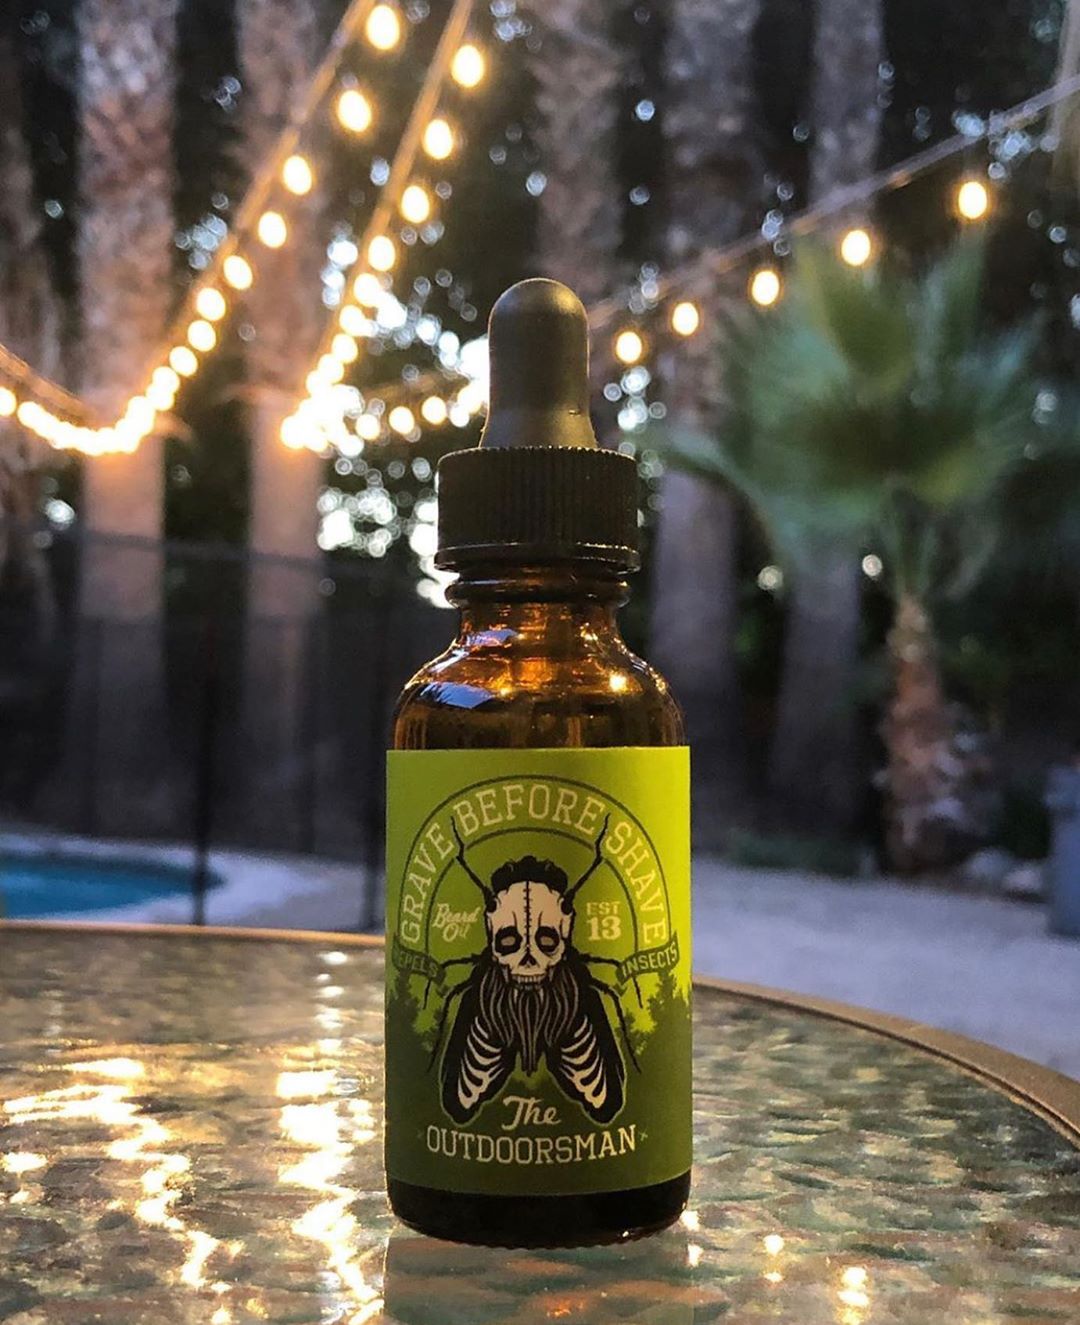 wayne bailey - Keep the bugs away with our Citronella scented Outdoorsman Beard Oil! Also available as a balm or butter!
•
•
WWW.GRAVEBEFORESHAVE.COM for info or to stock up 👍🏻
•
•
@gravebeforeshave #...